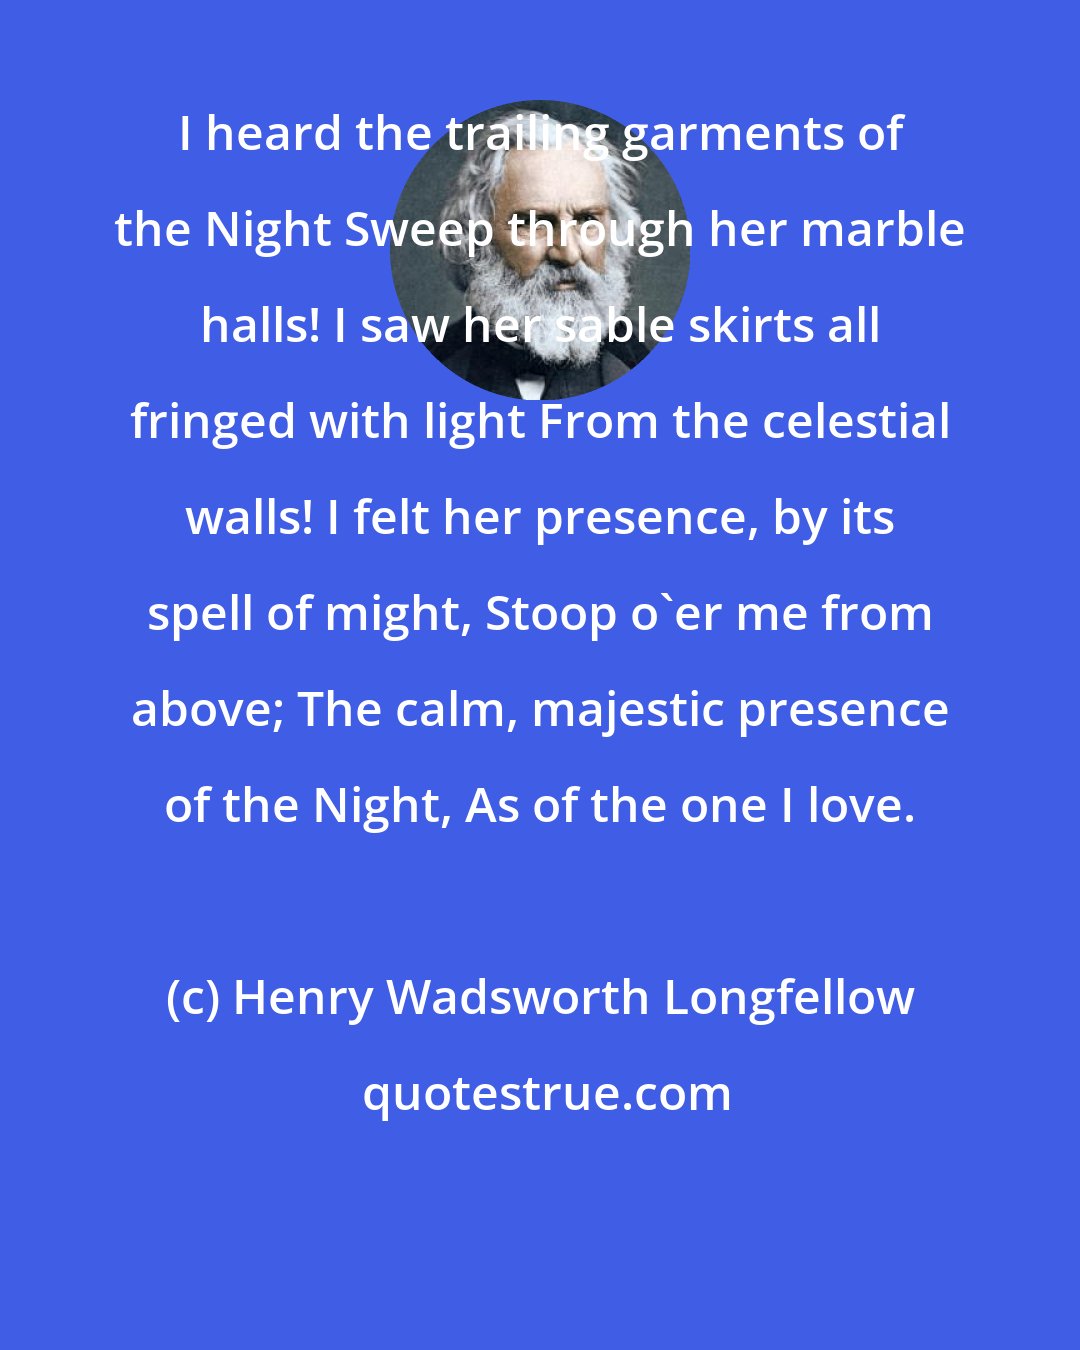 Henry Wadsworth Longfellow: I heard the trailing garments of the Night Sweep through her marble halls! I saw her sable skirts all fringed with light From the celestial walls! I felt her presence, by its spell of might, Stoop o'er me from above; The calm, majestic presence of the Night, As of the one I love.